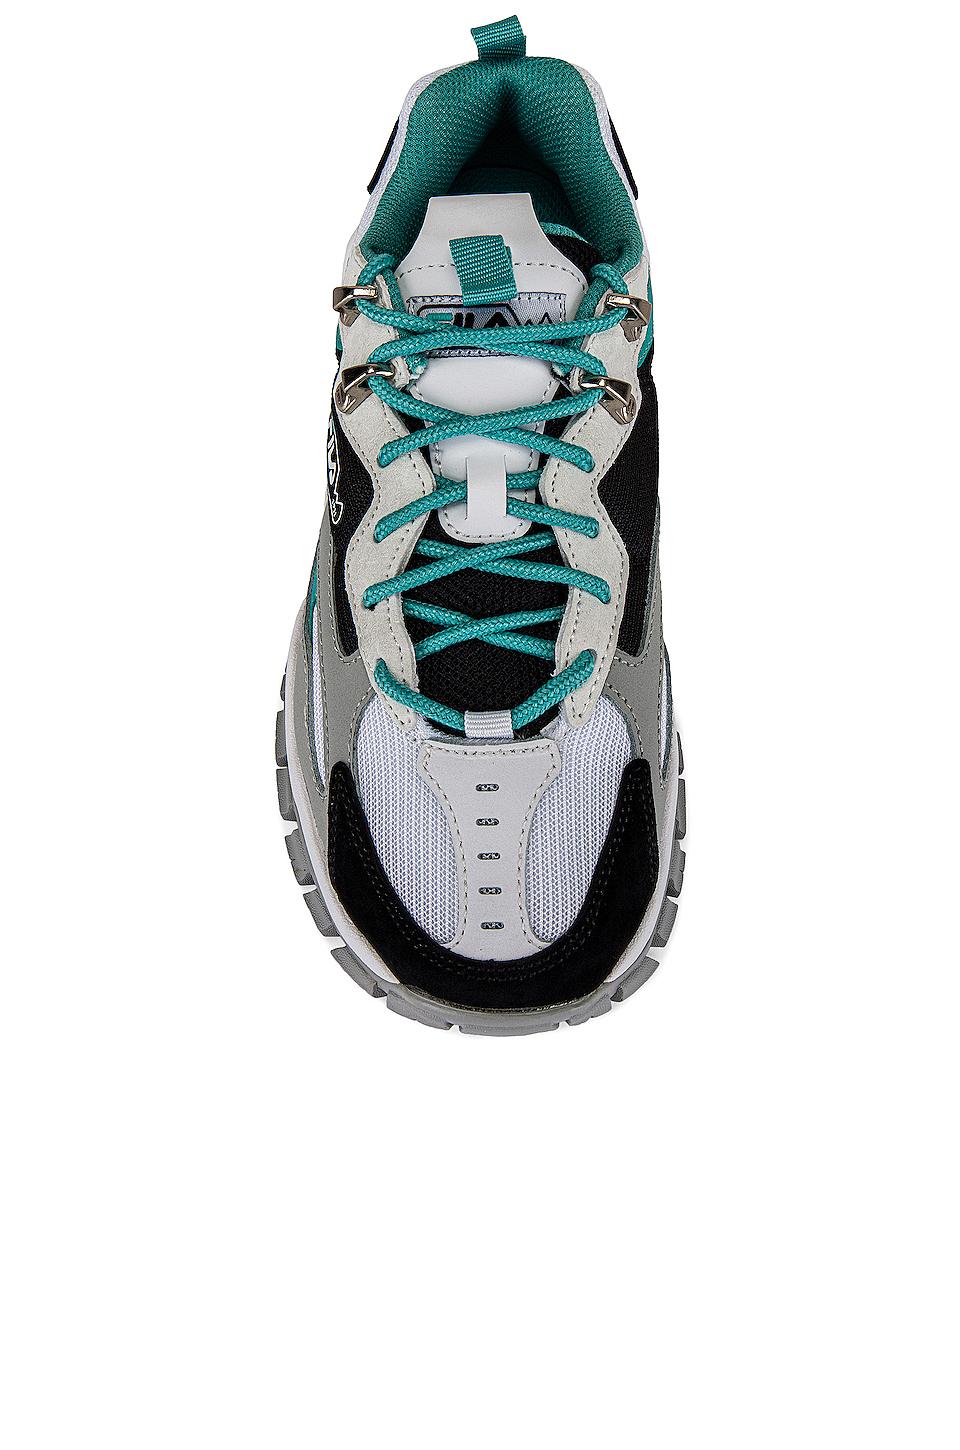 Fila Ray Tracer Tr 2 Sneaker in White Black & Blue Turquoise (Blue) | Lyst